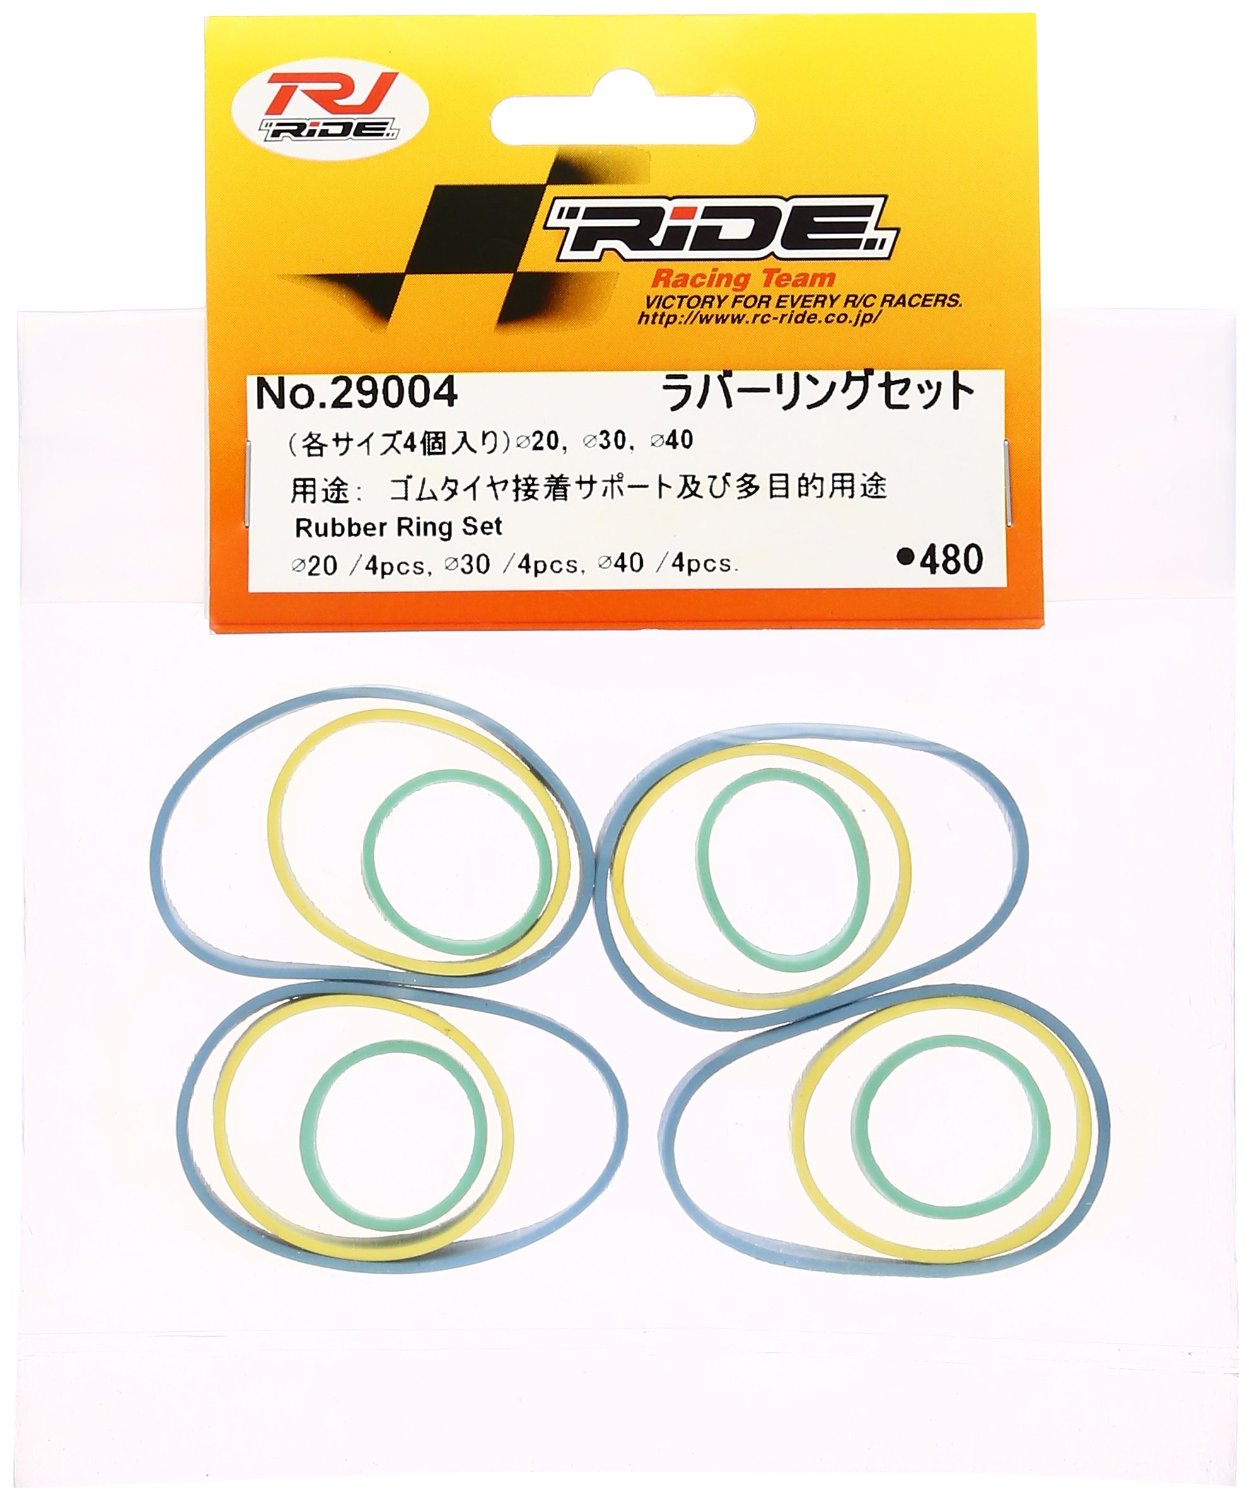 29004 Rubber Ring Set